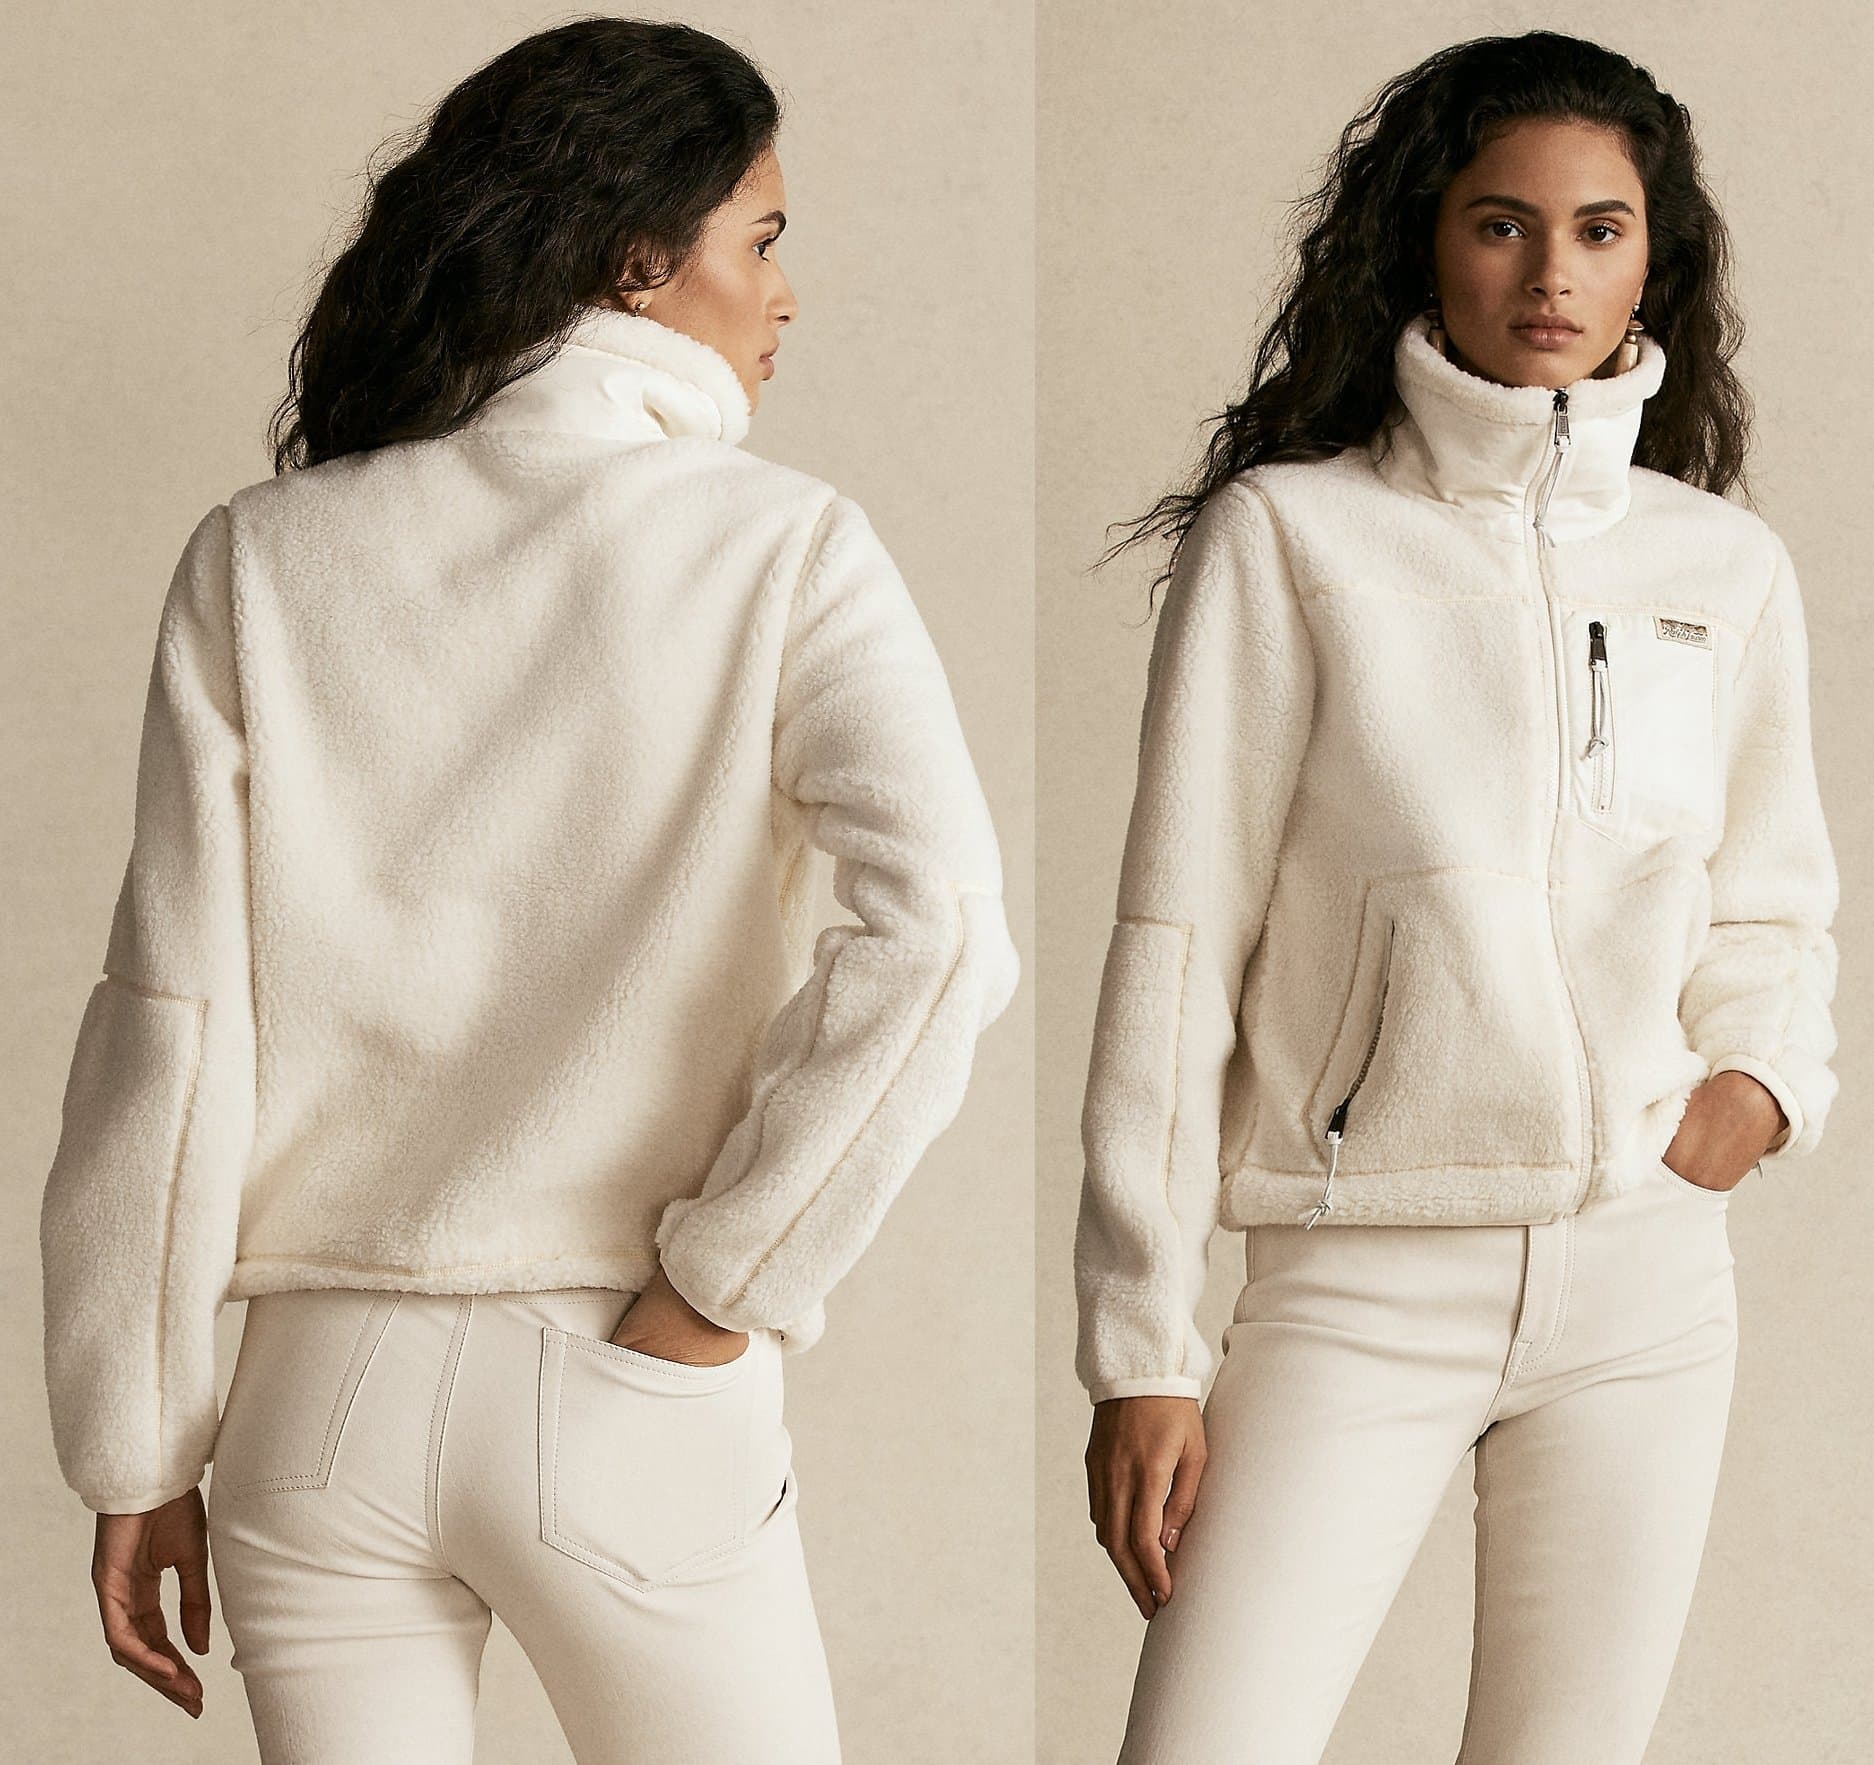 Supple sheepskin details the collar and pocketing of this full-zip jacket, which is crafted from plush fleece for premium softness and warmth